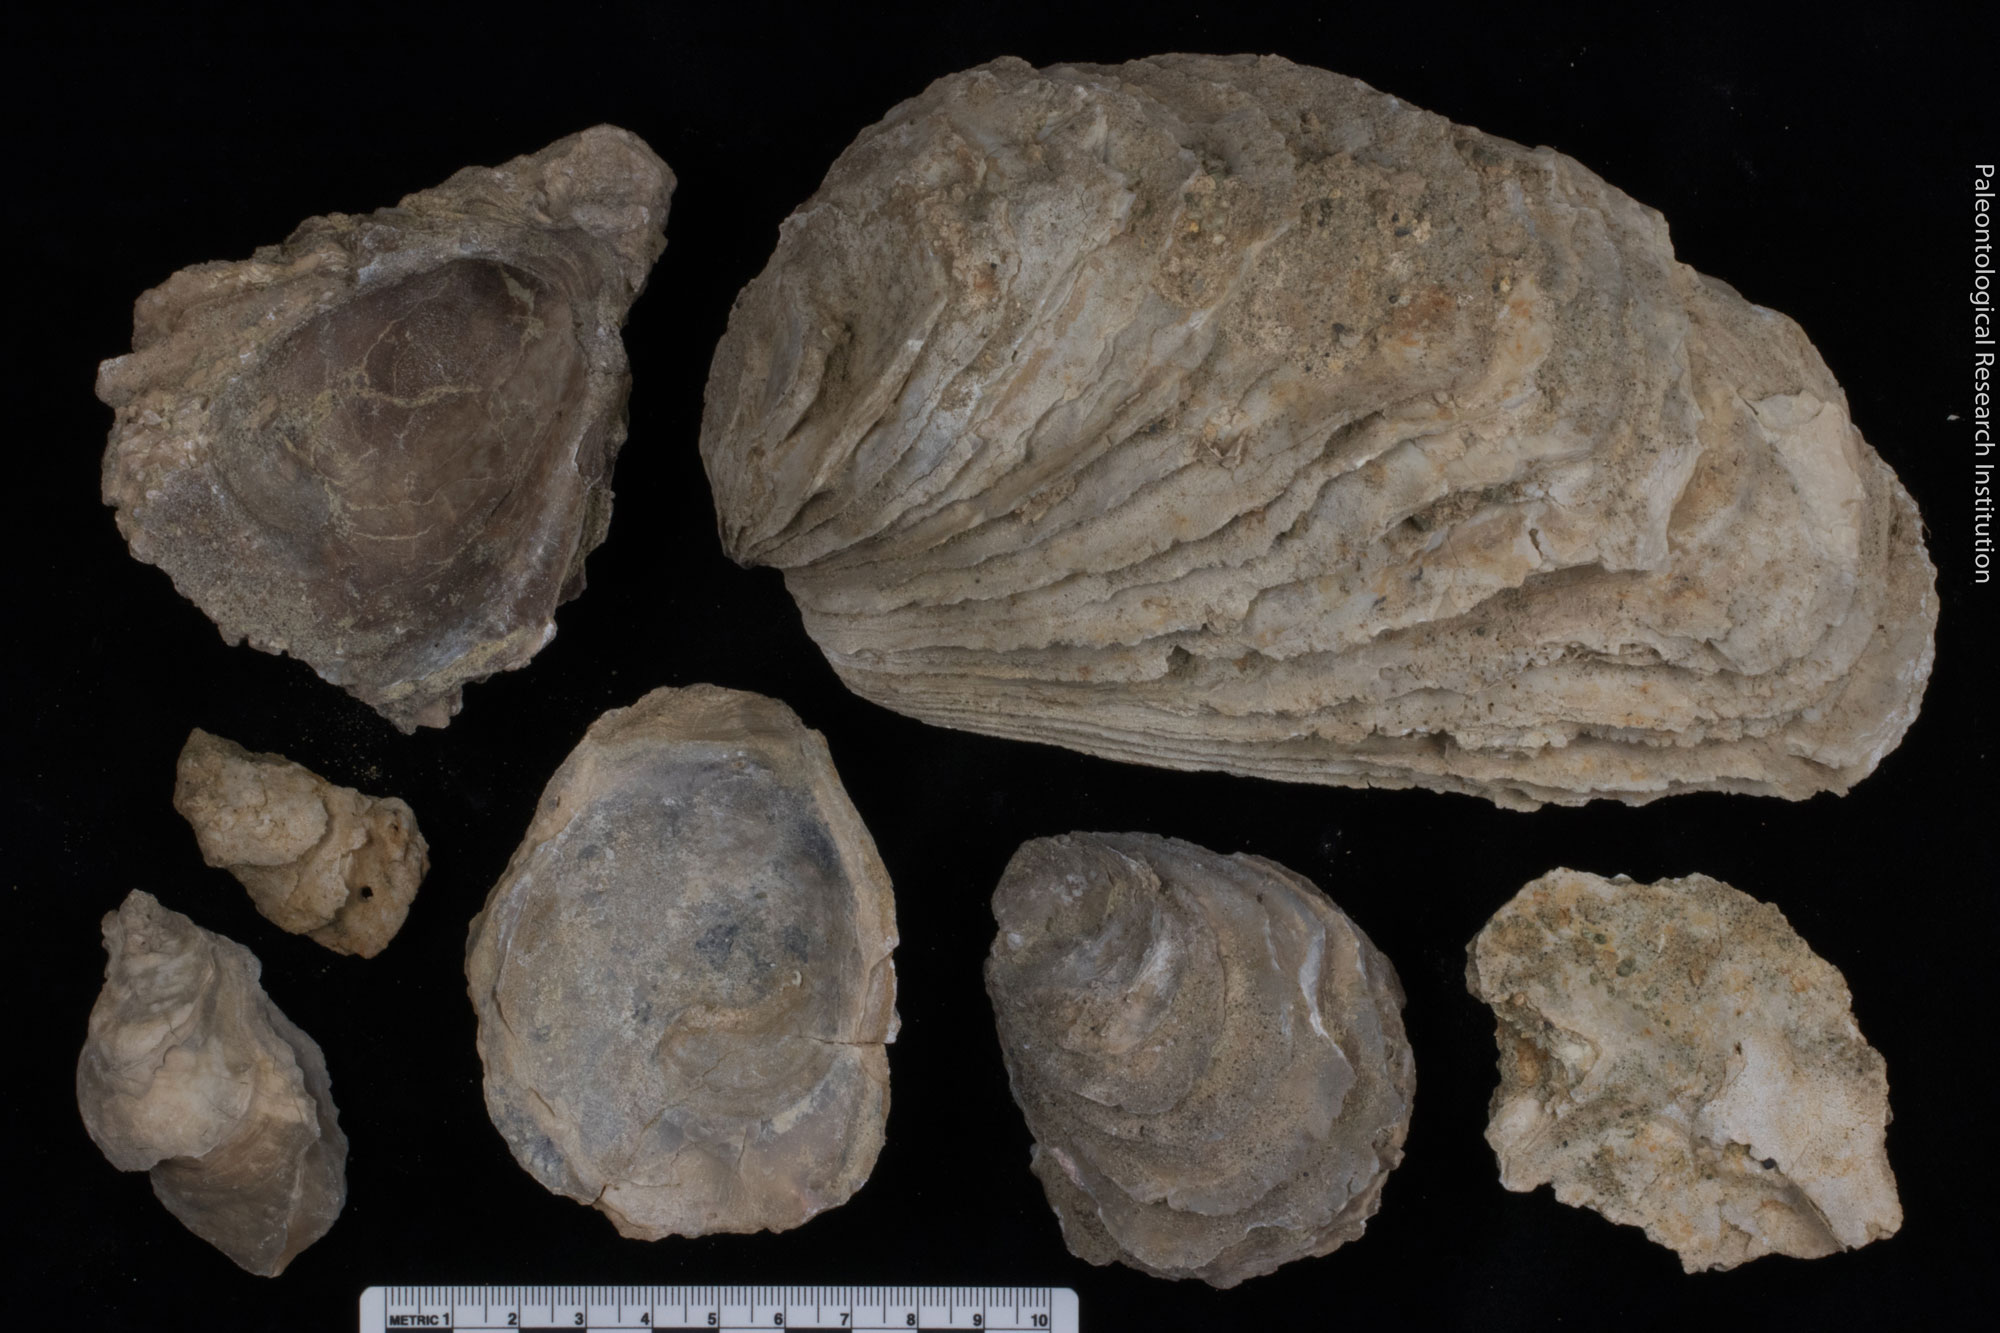 Photograph of a group of oyster shell vales from the Miocene of California. The shells are slightly to much longer than wide. The outer surface has a series of ridges with slightly irregular edges. The photo shows 7 valves of various sizes.